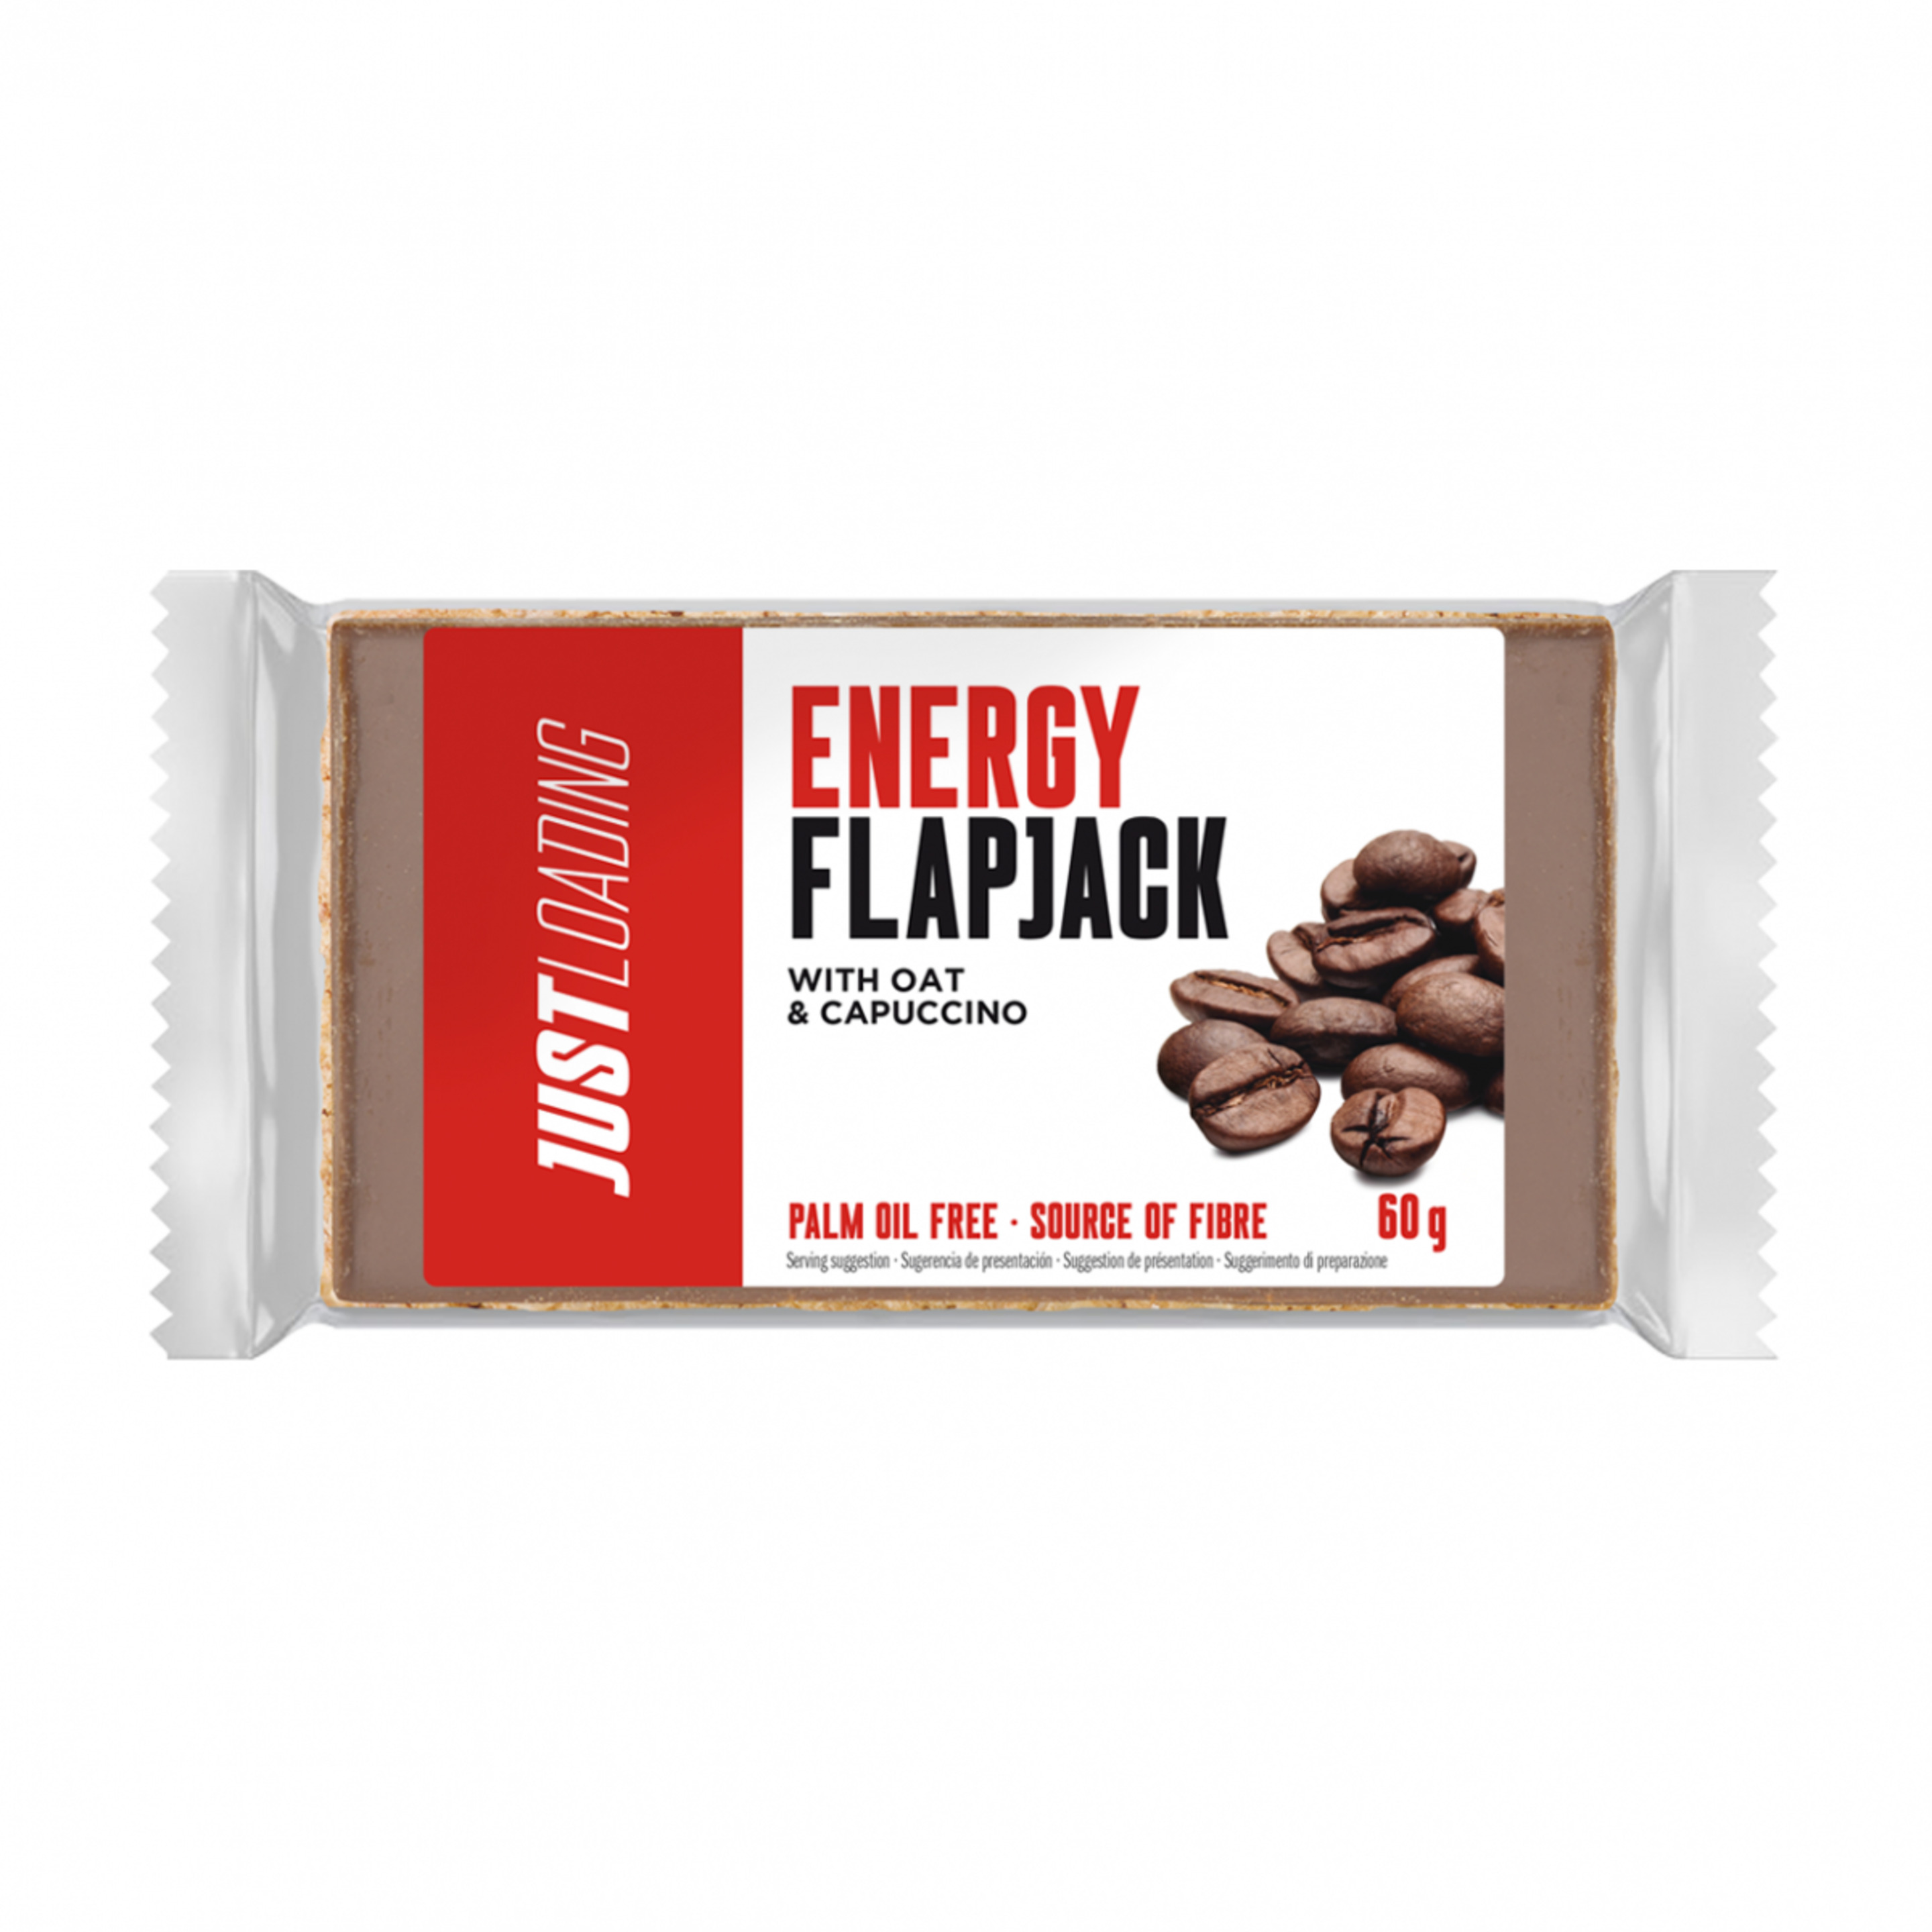 Flapjack Energético Chocolate Y Capuccino Justloading -  - 